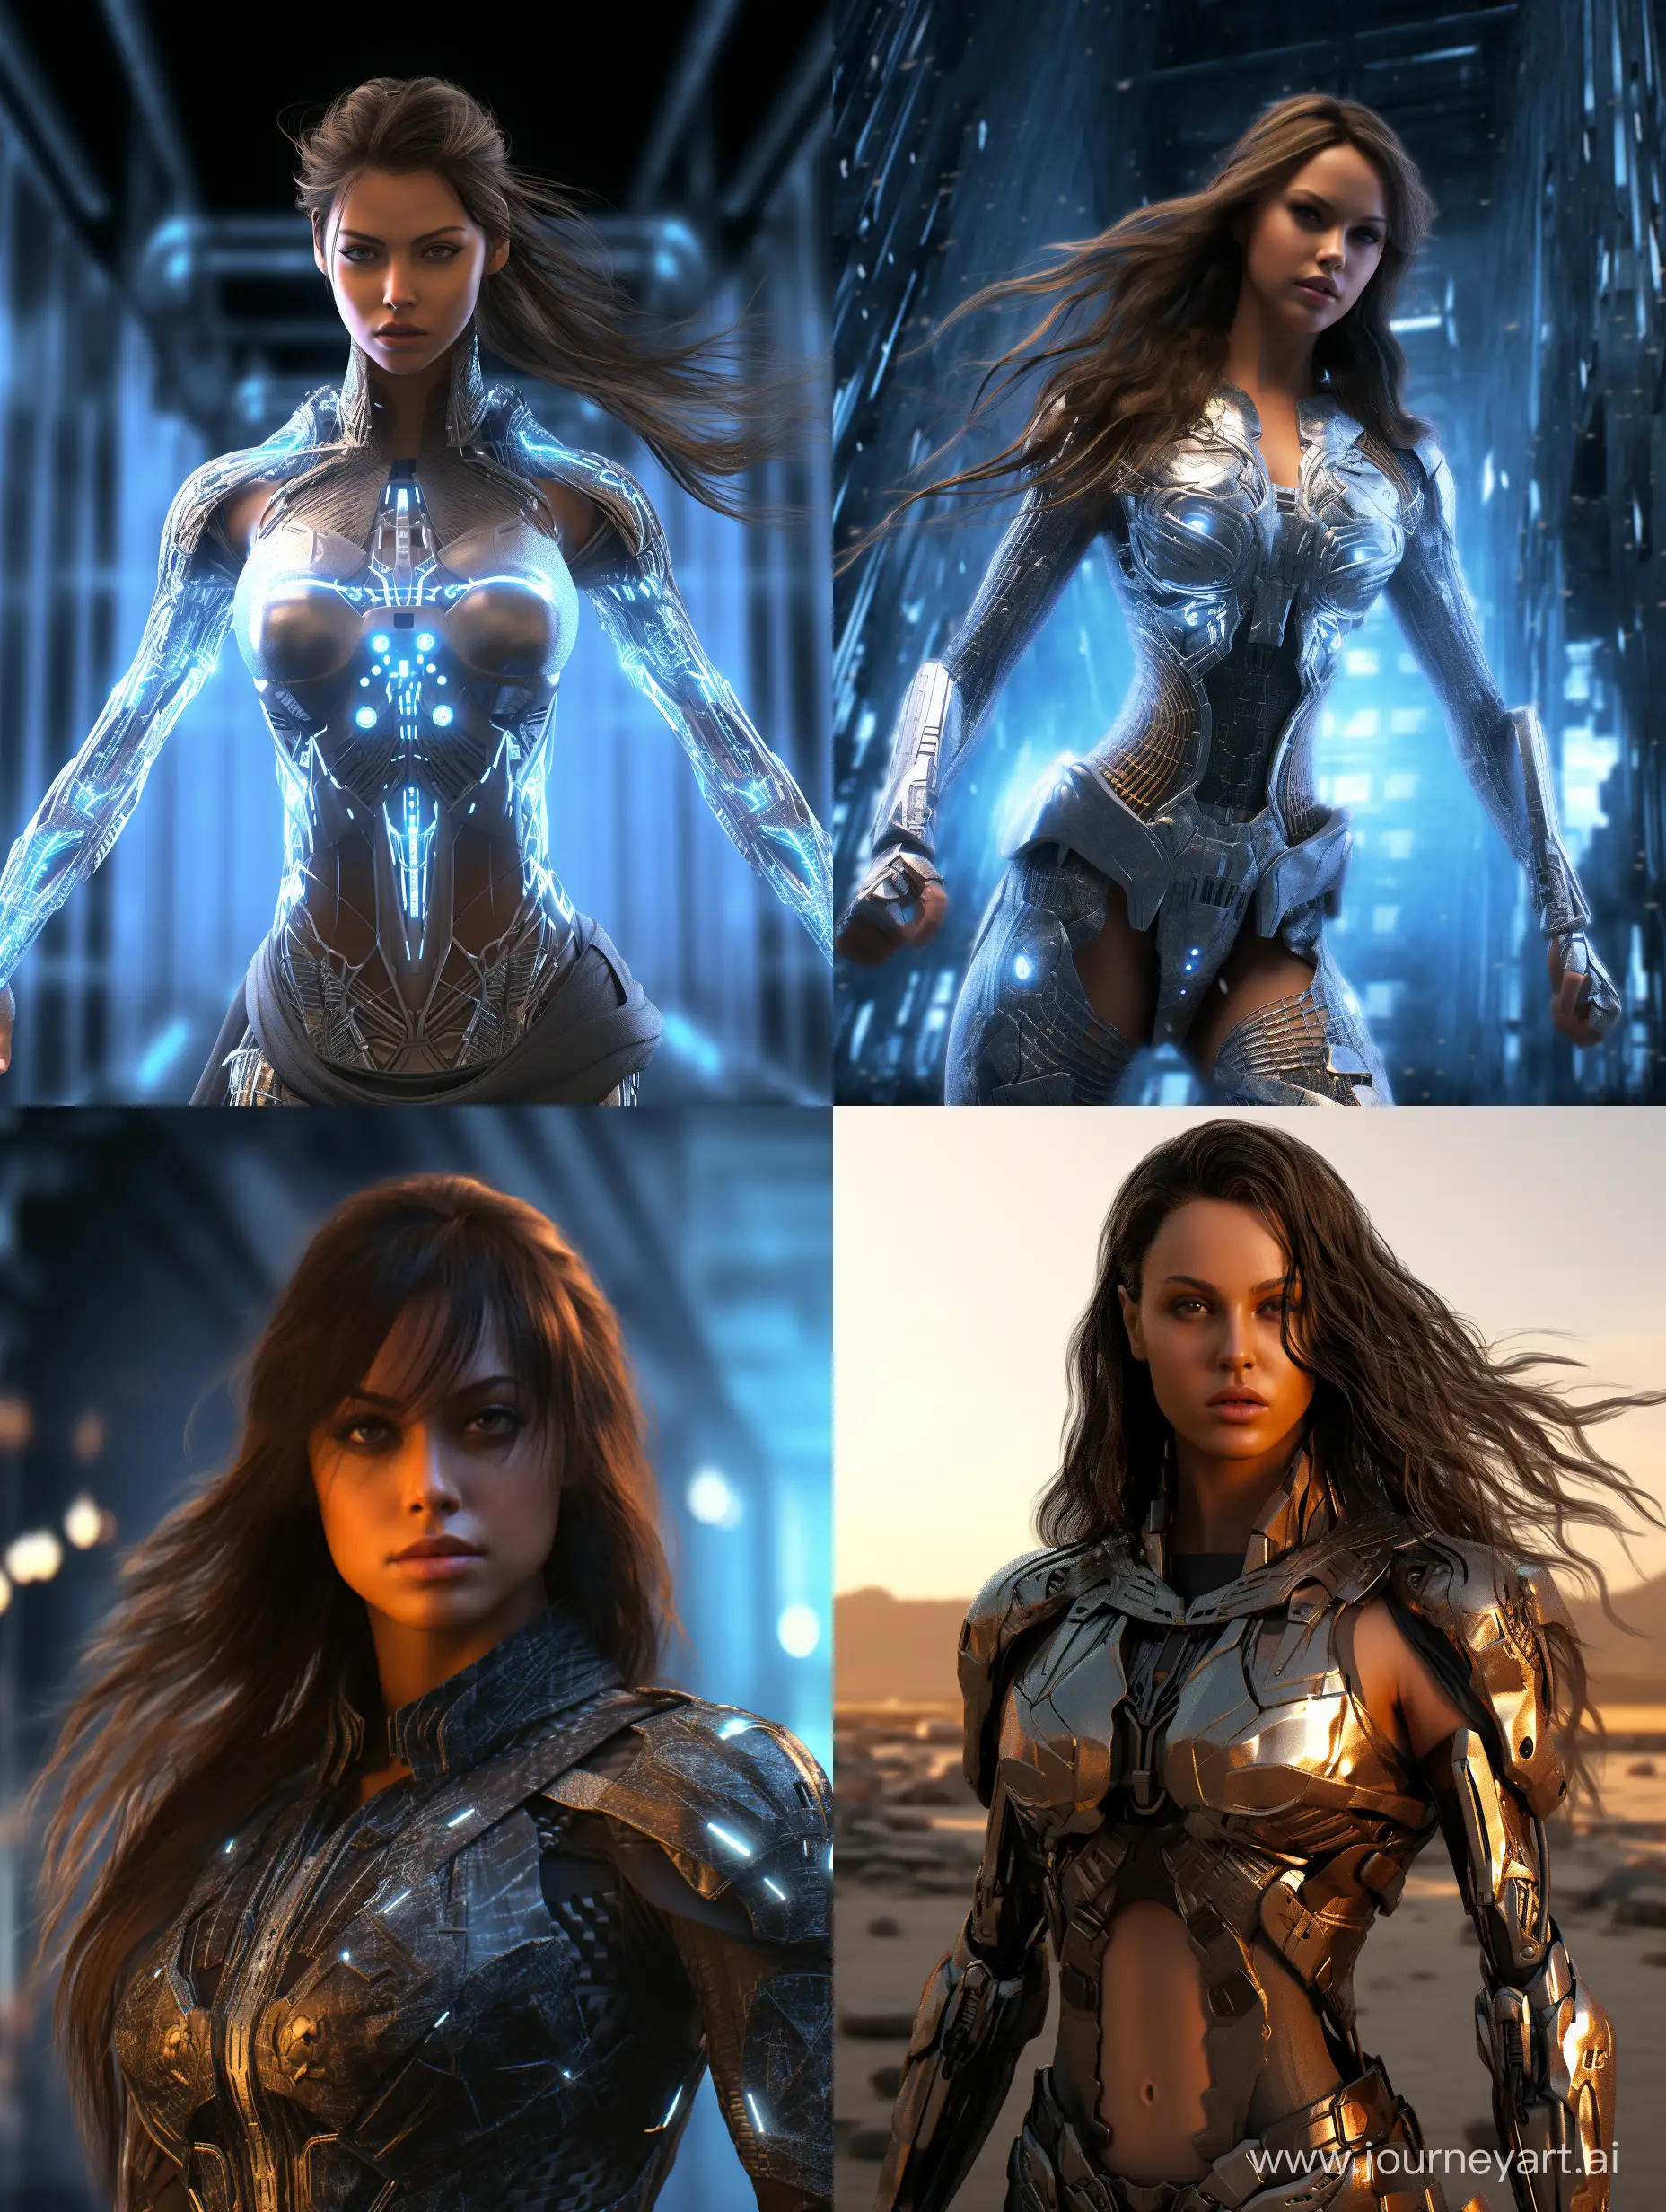 Cybernetics, action movie protagonist, female warrior, virus, cyberspace, repeating patterns, unreal, sound waves, free melody, digital world, reflection, masterpiece, 32k UHD resolution, high quality, professional photography, depth of filed, sci-fi, cinematic angle, cinematic lights, dynamic warrior pose, ultra sharp, high contrast, realistic, highly detailed, intricate details, photorealism, 32k.